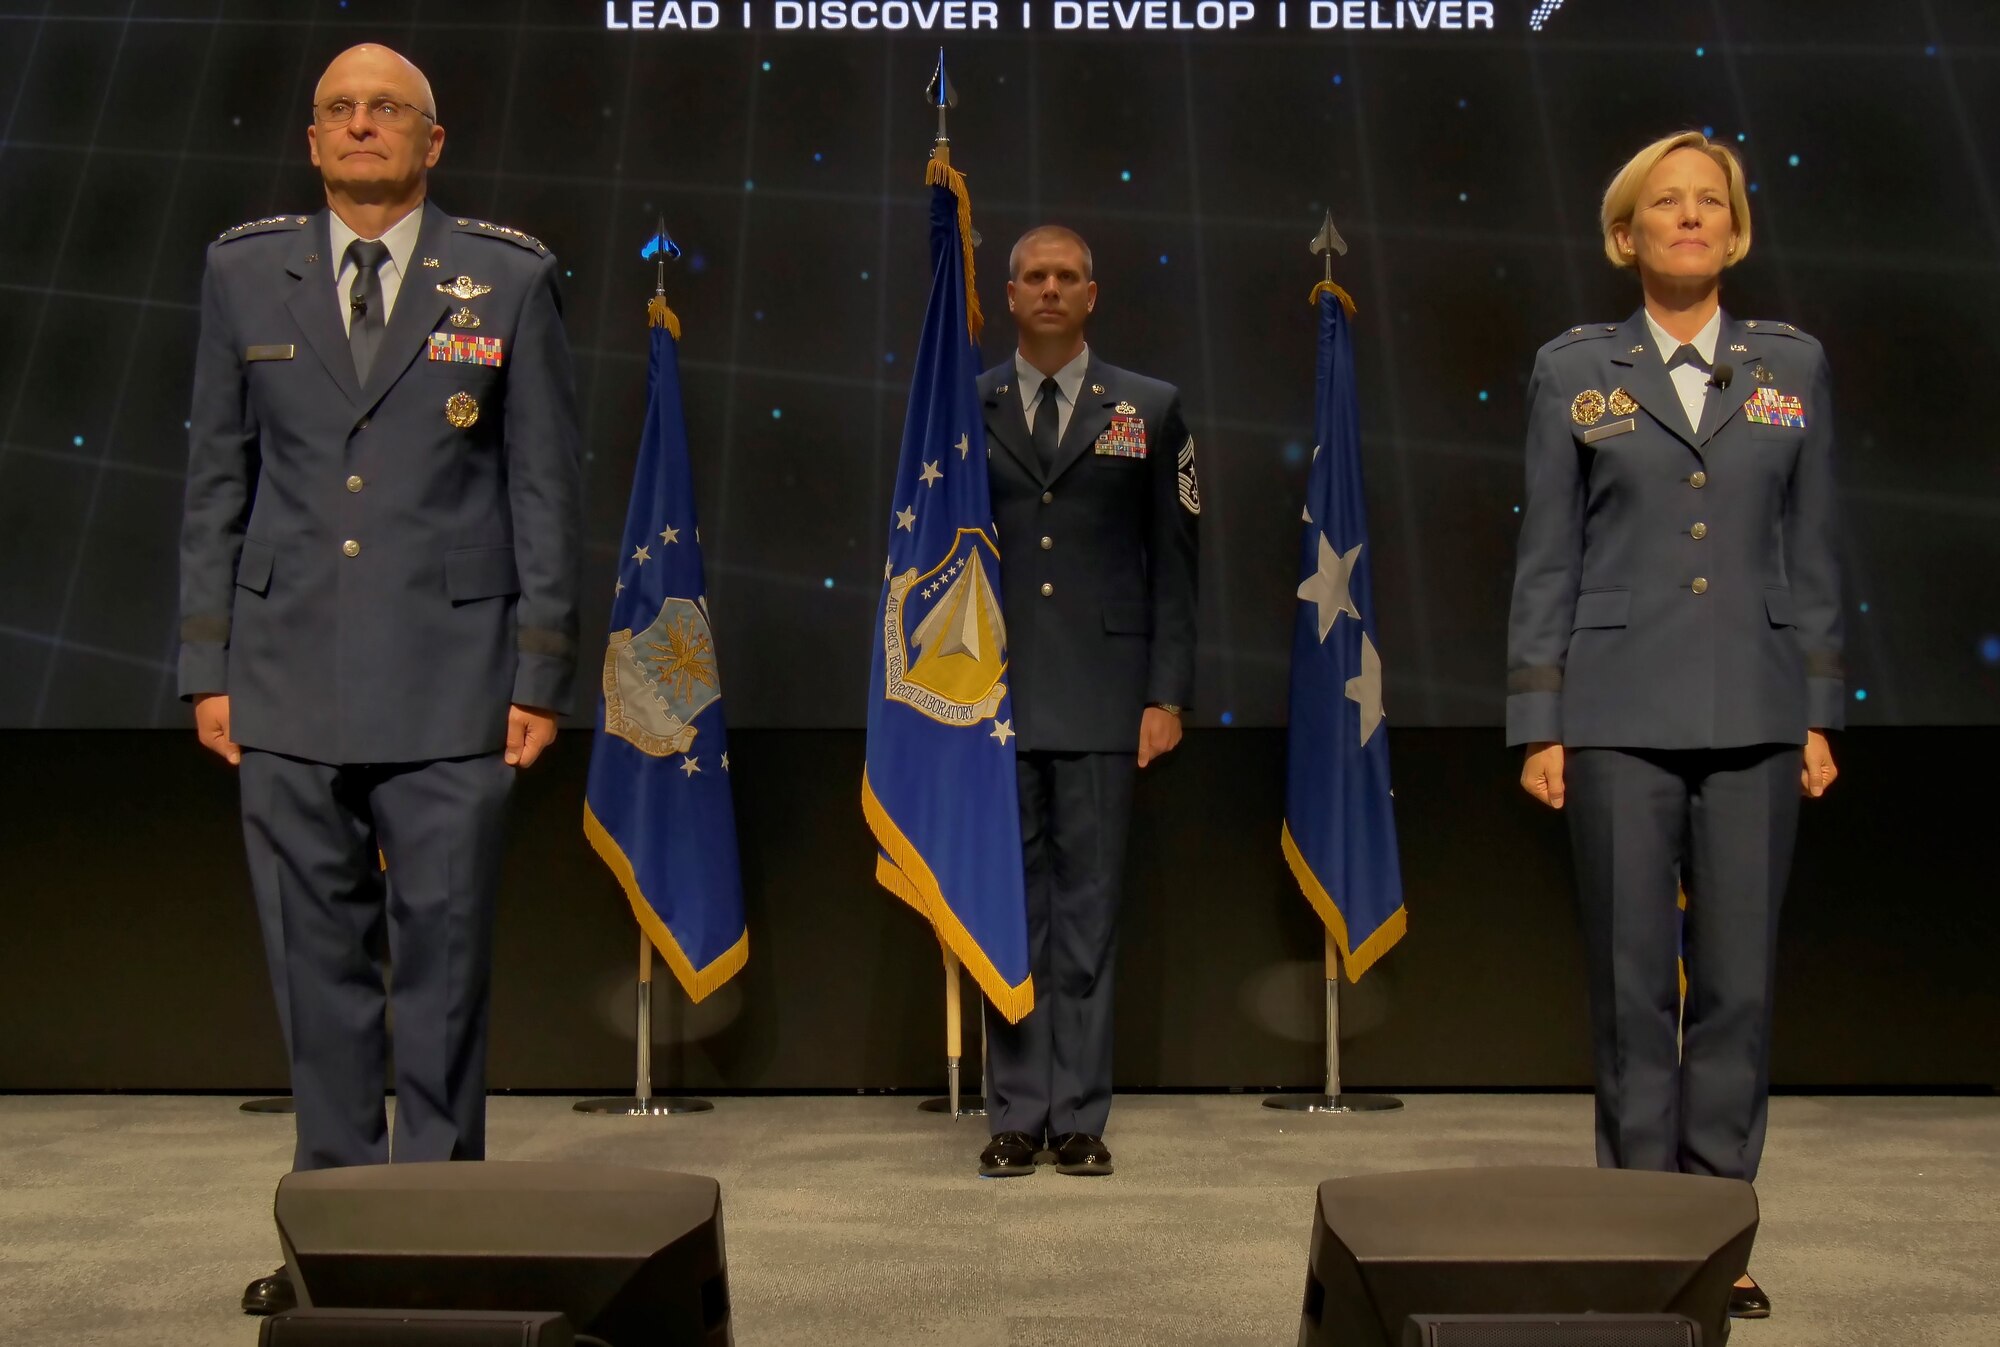 Gen. Arnold W. Bunch, commander, Air Force Materiel Command, presided over Brig. Gen. Heather L. Pringle’s assumption of command ceremony June 18 at the Air Force Institute of Technology’s Kenney Hall Auditorium. (U.S. Air Force Photo/Keith Lewis)